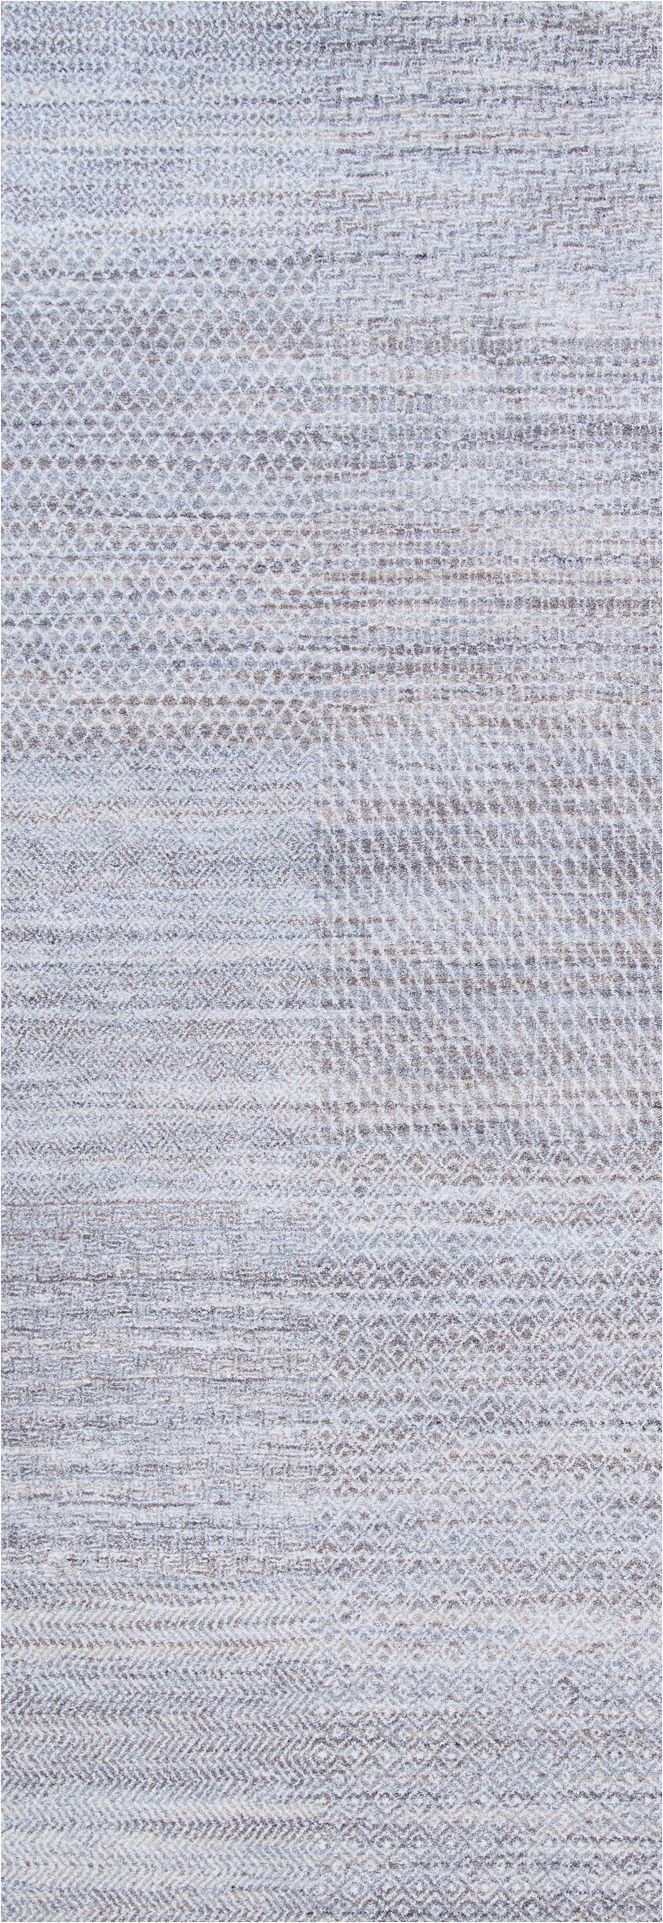 Finished Runner Couristan AreaRugs Nomad Area Rugs By Couristan 2617-6262 Drift Poly Made In Belgium